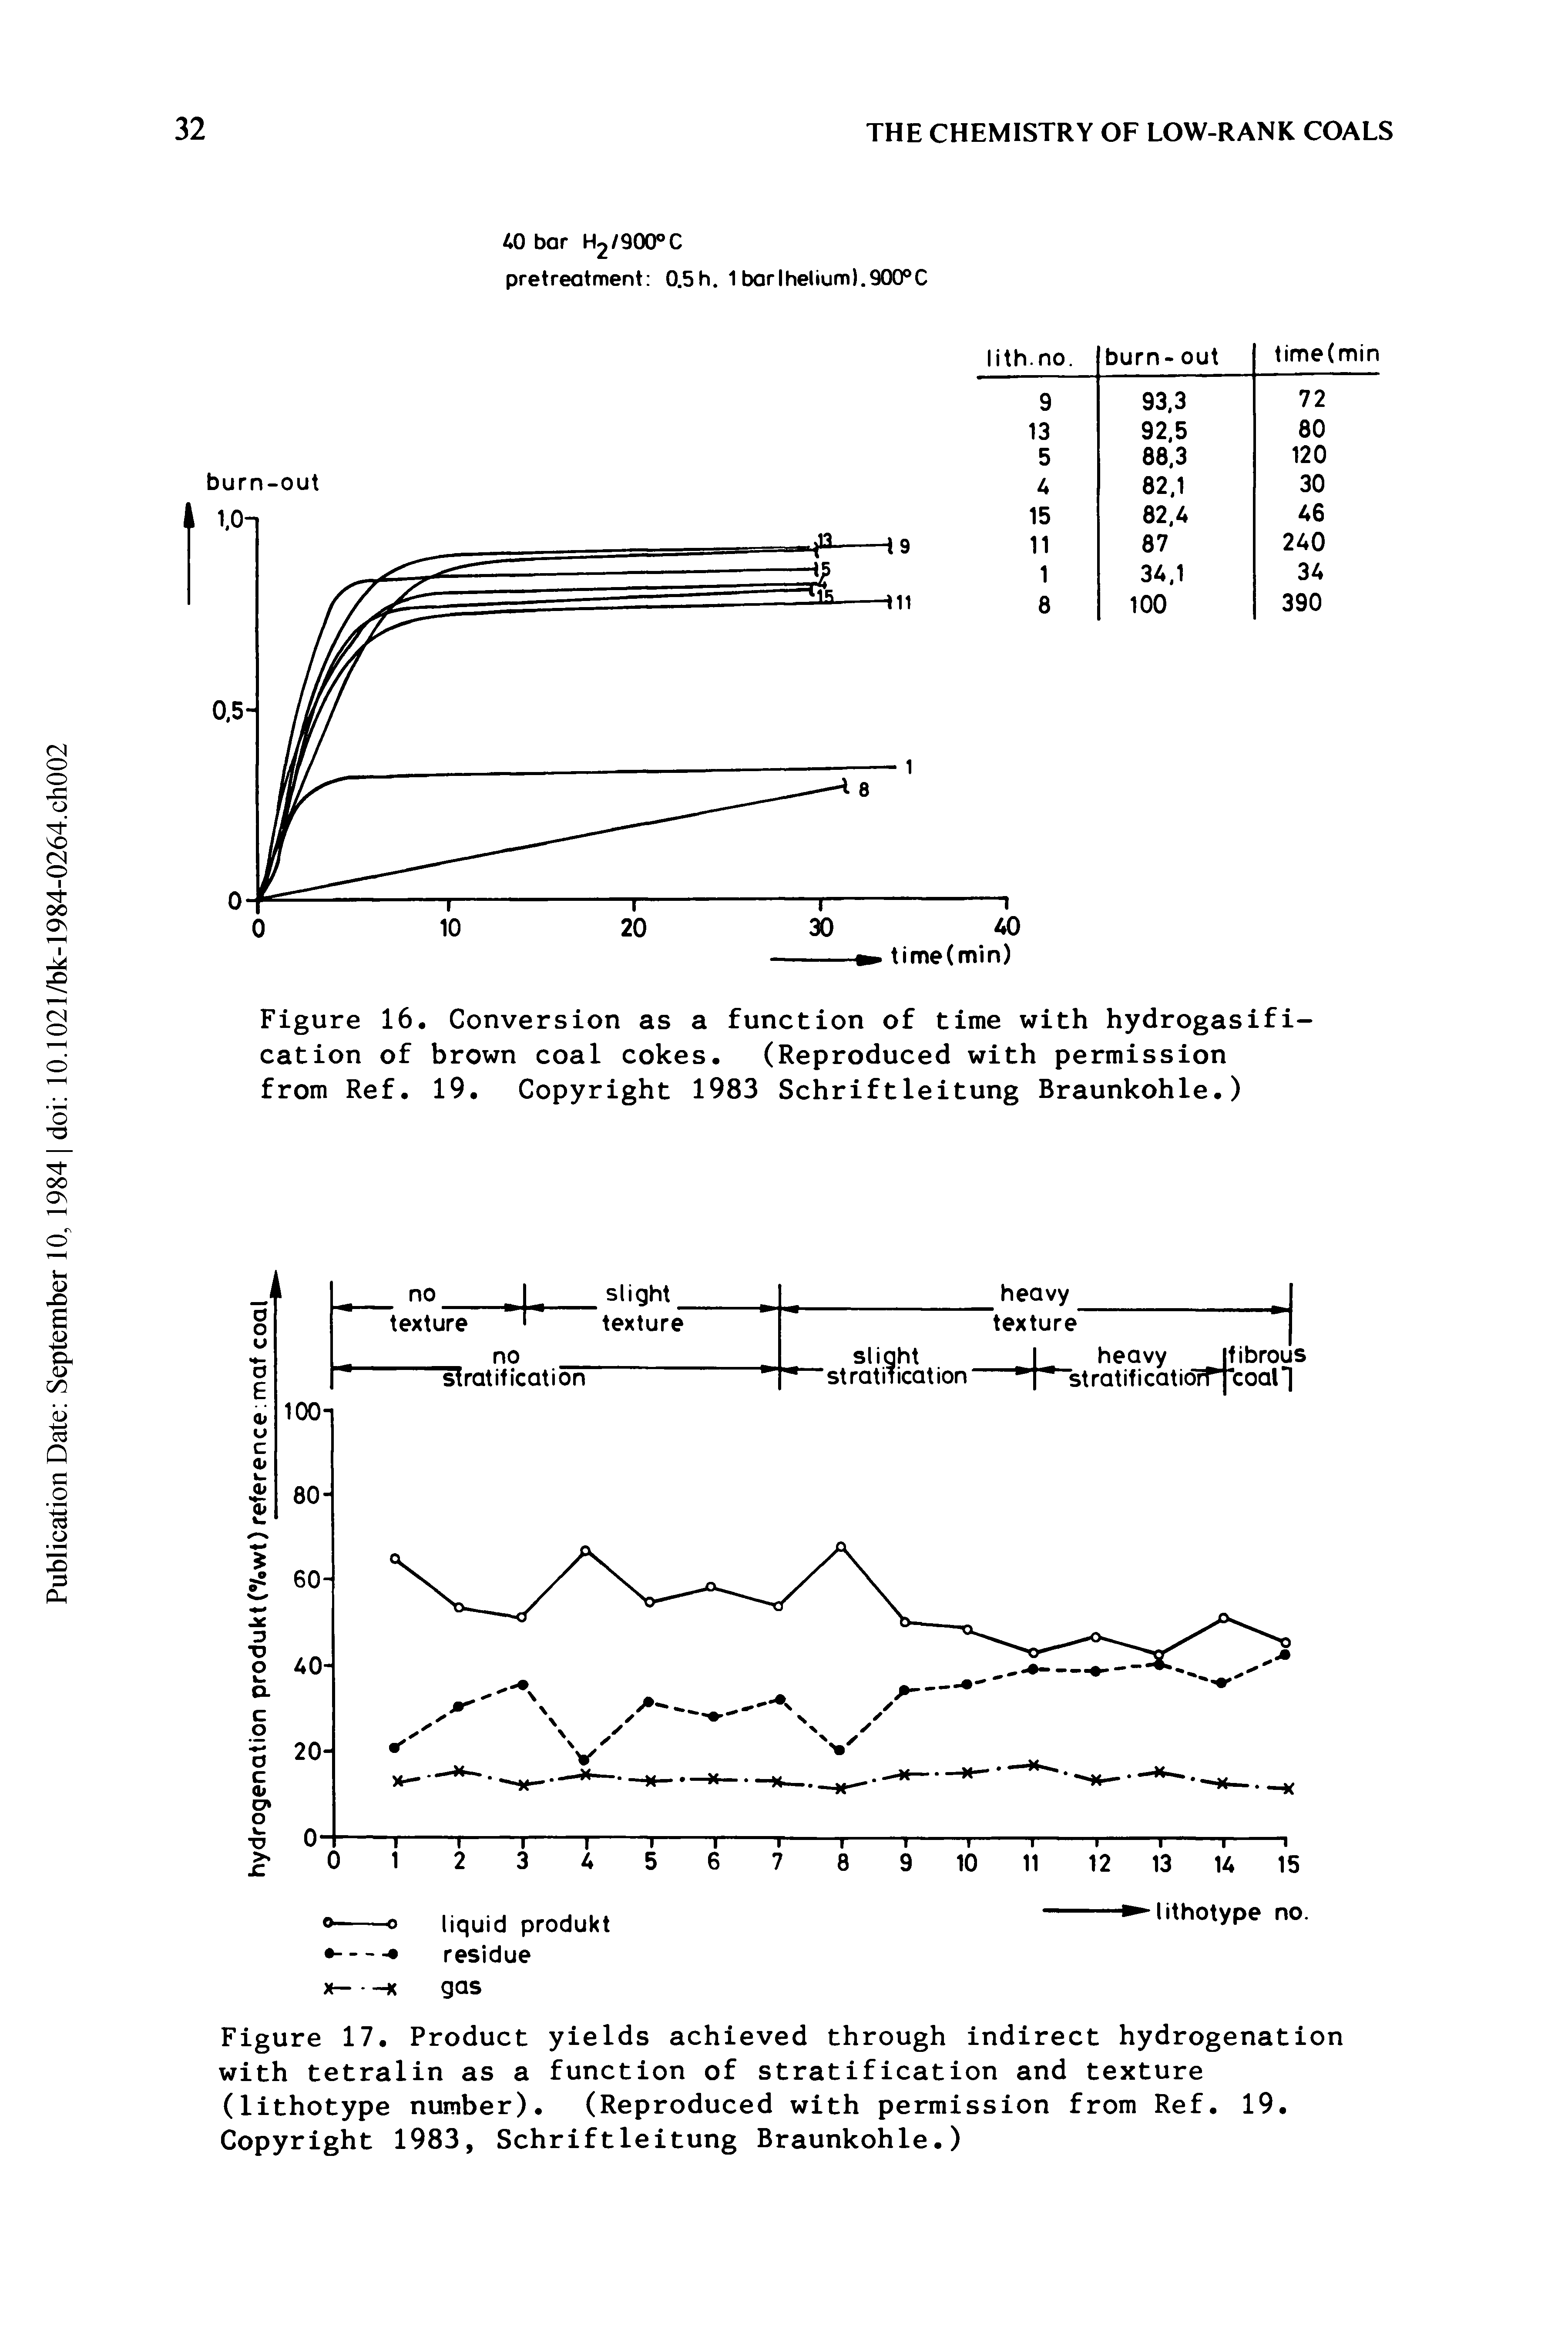 Figure 16. Conversion as a function of time with hydrogasification of brown coal cokes. (Reproduced with permission from Ref. 19. Copyright 1983 Schriftleitung Braunkohle.)...